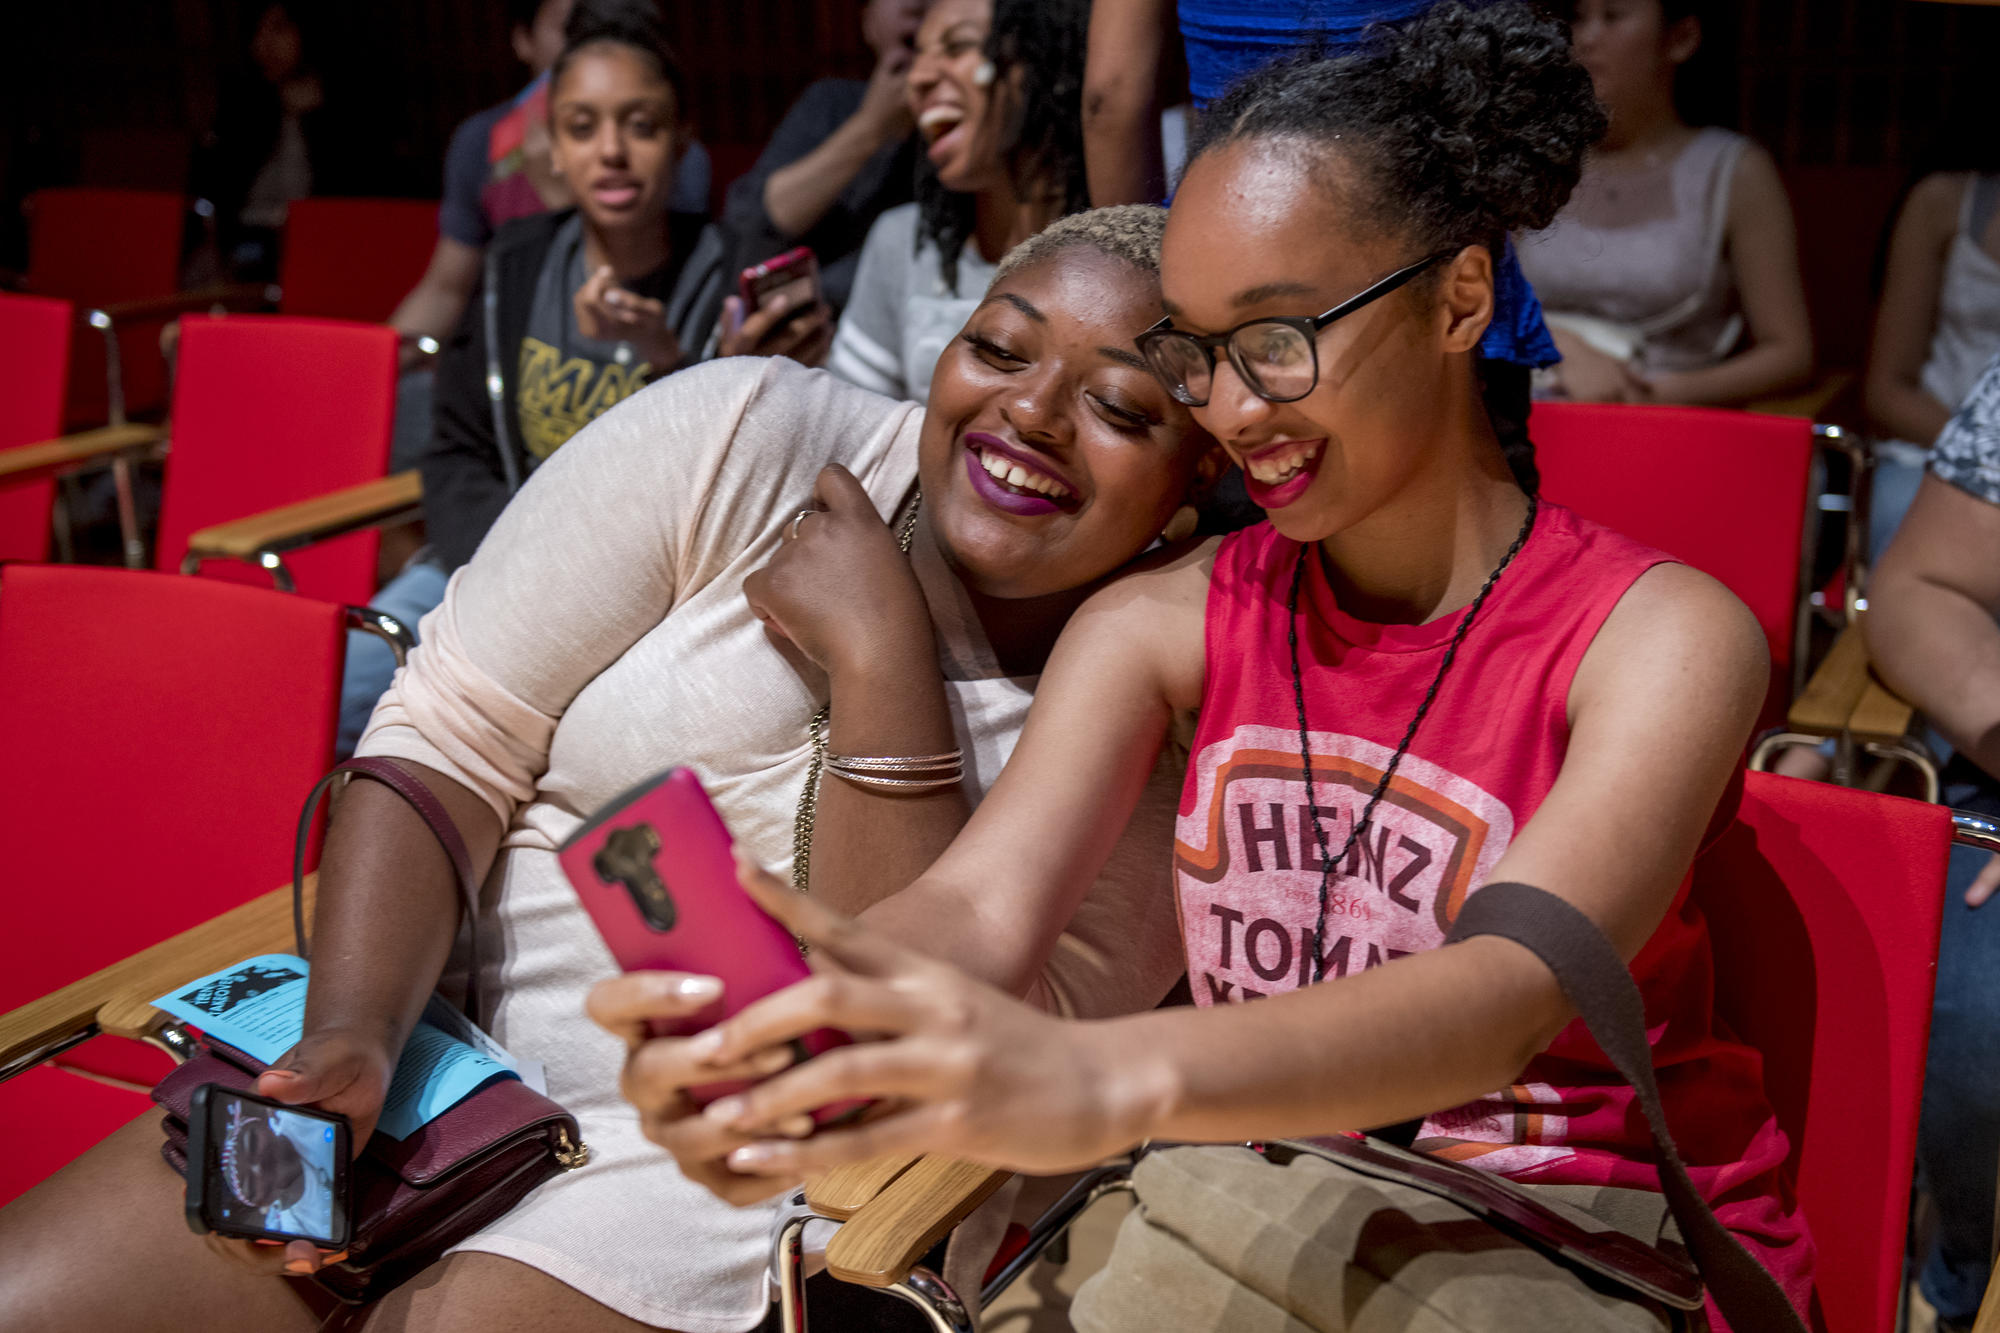 Teens take a selfie at the June 2016 Teen Takeover. Photo by Billie Weiss.